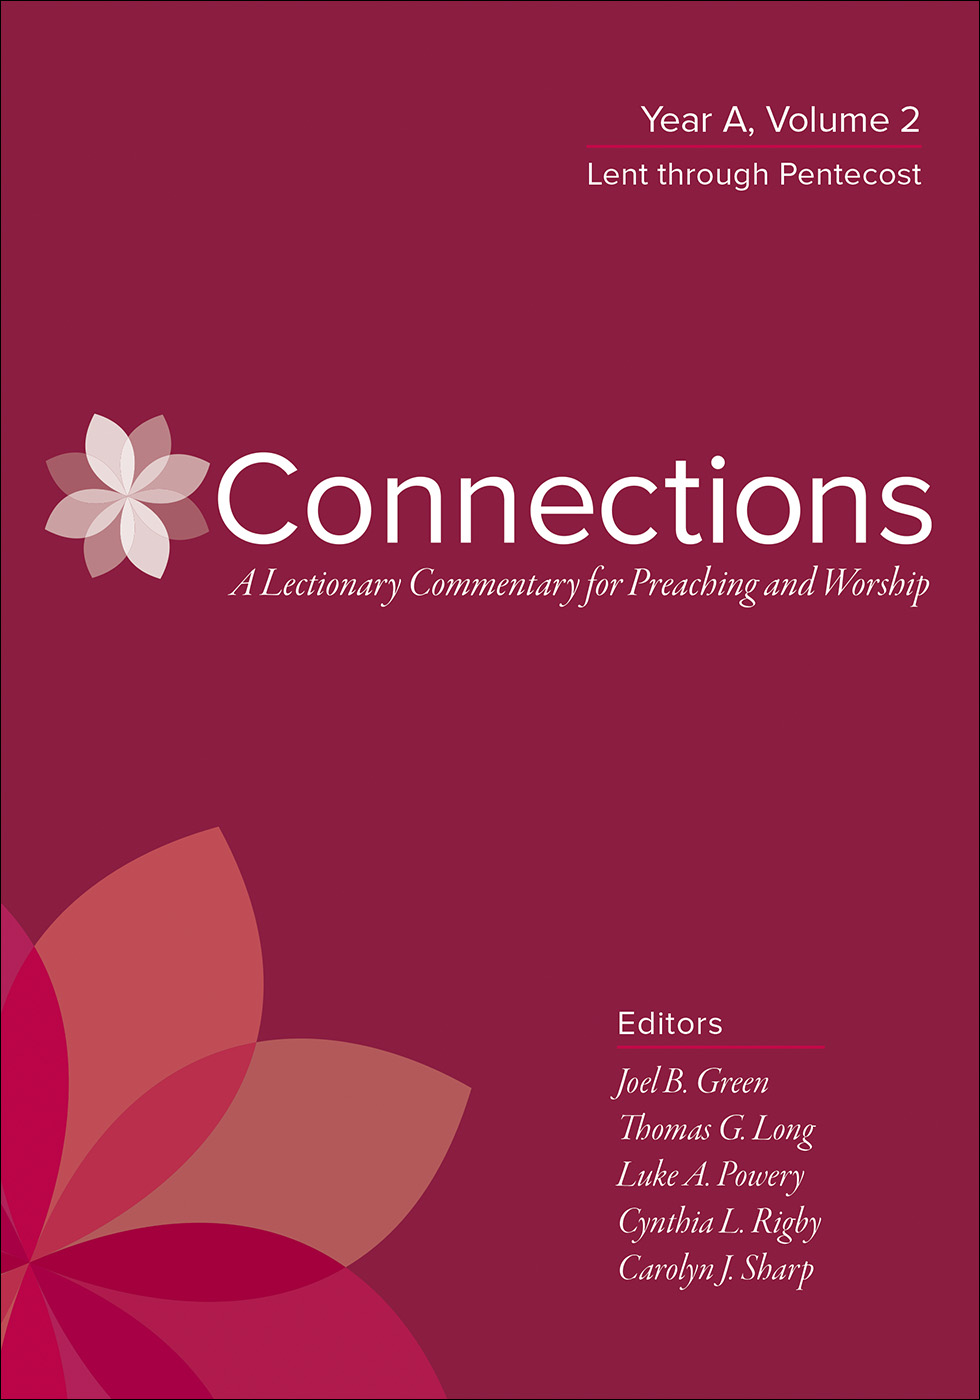 Connections: Year A, Volume 2